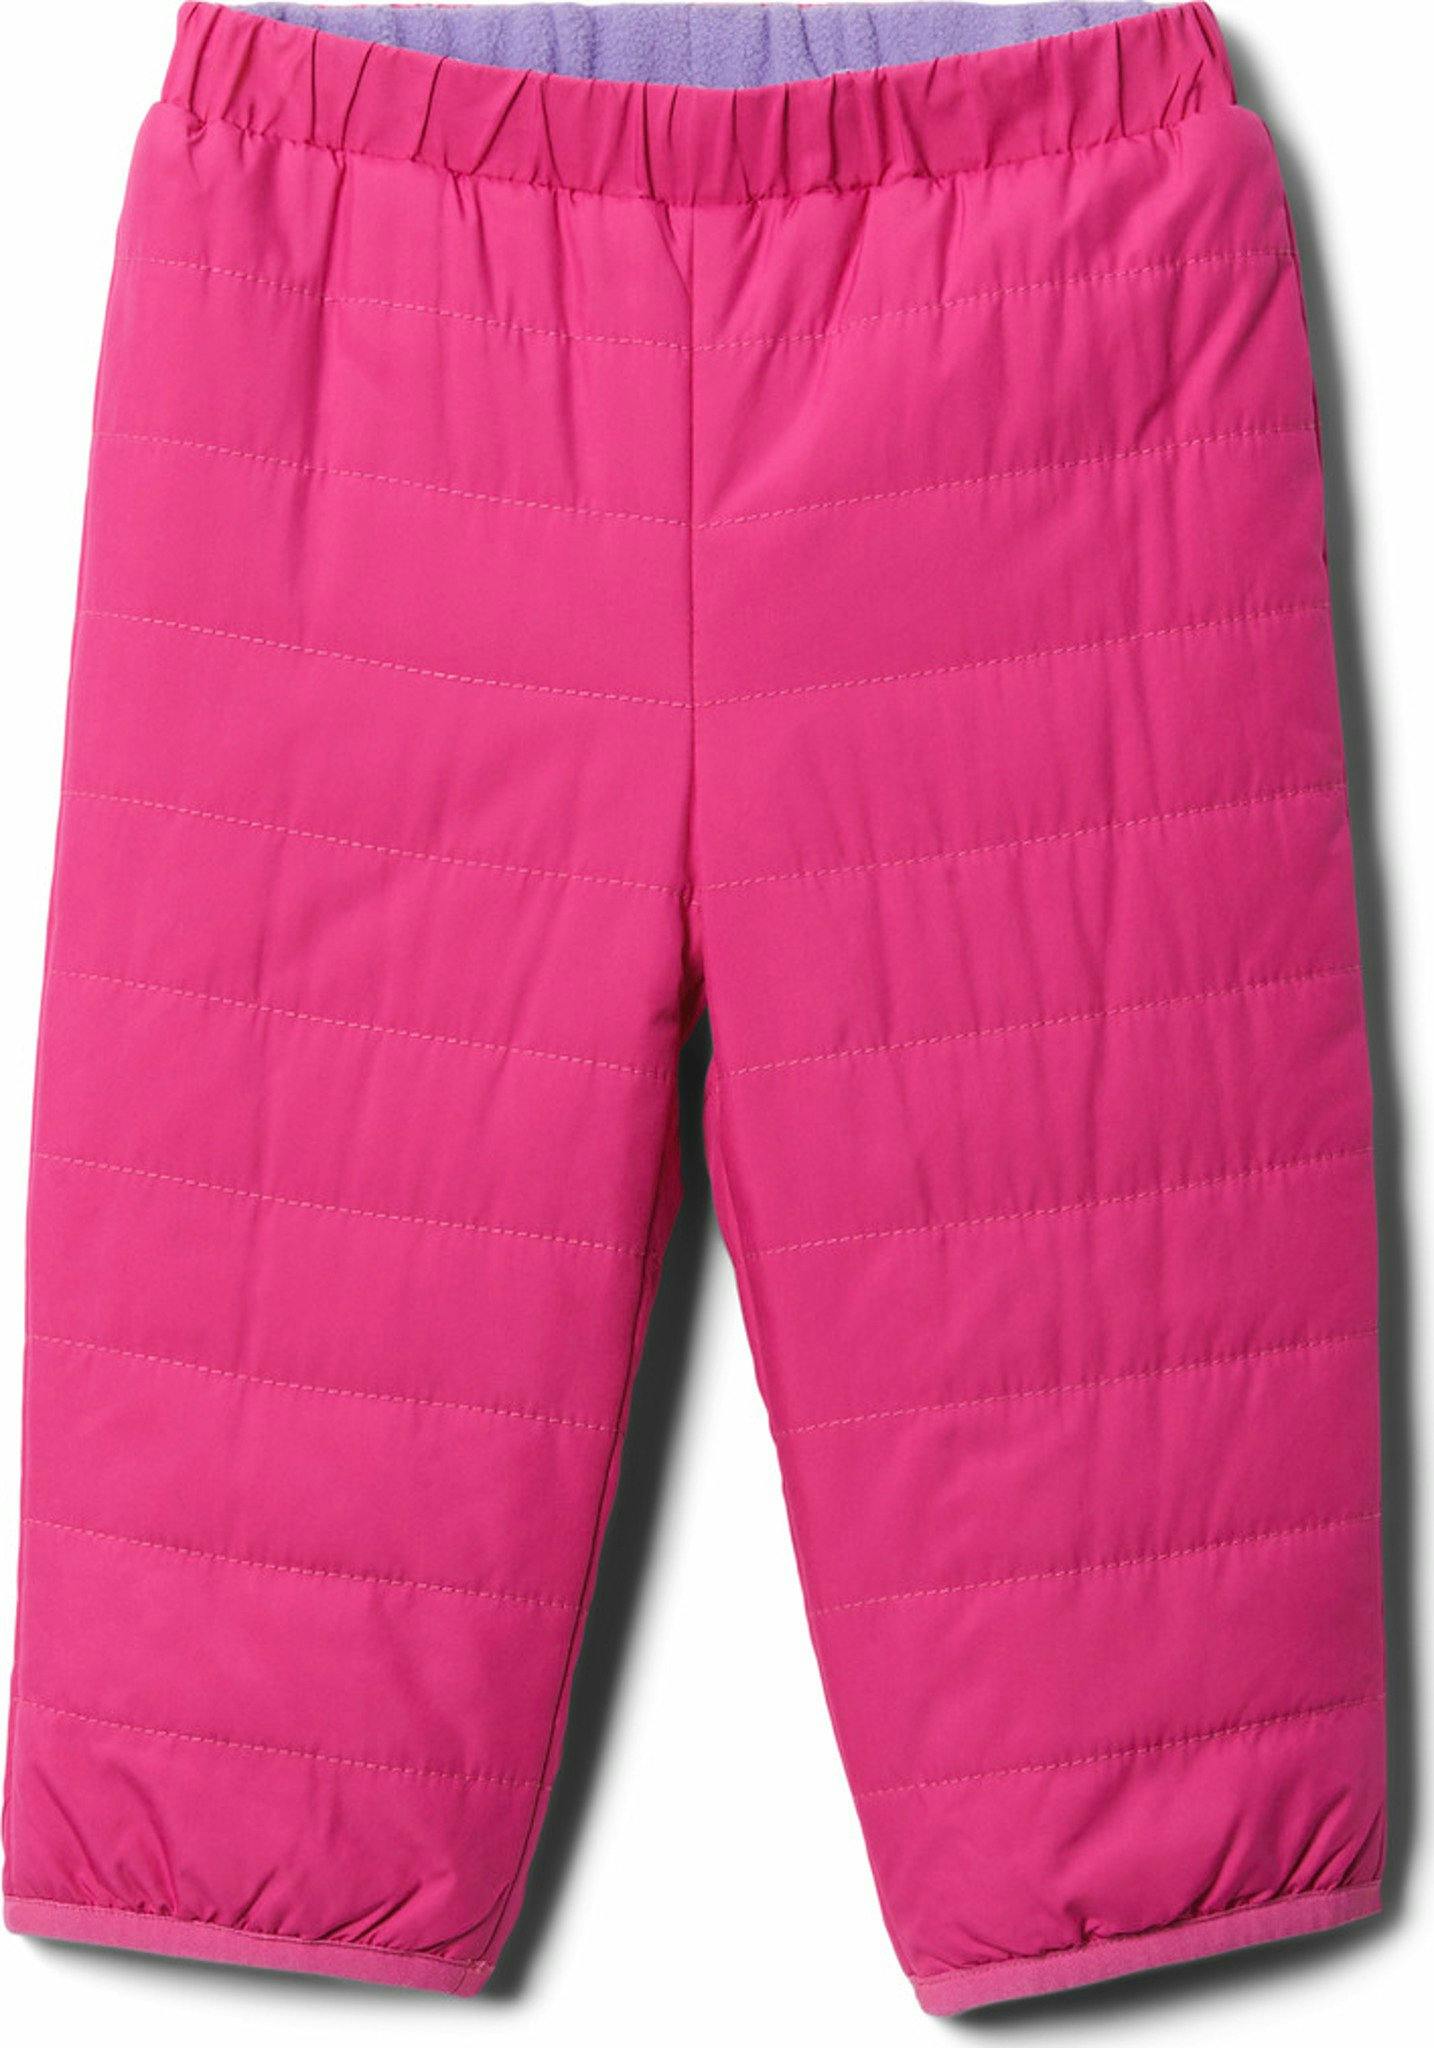 Product image for Double Trouble Pant - Toddler